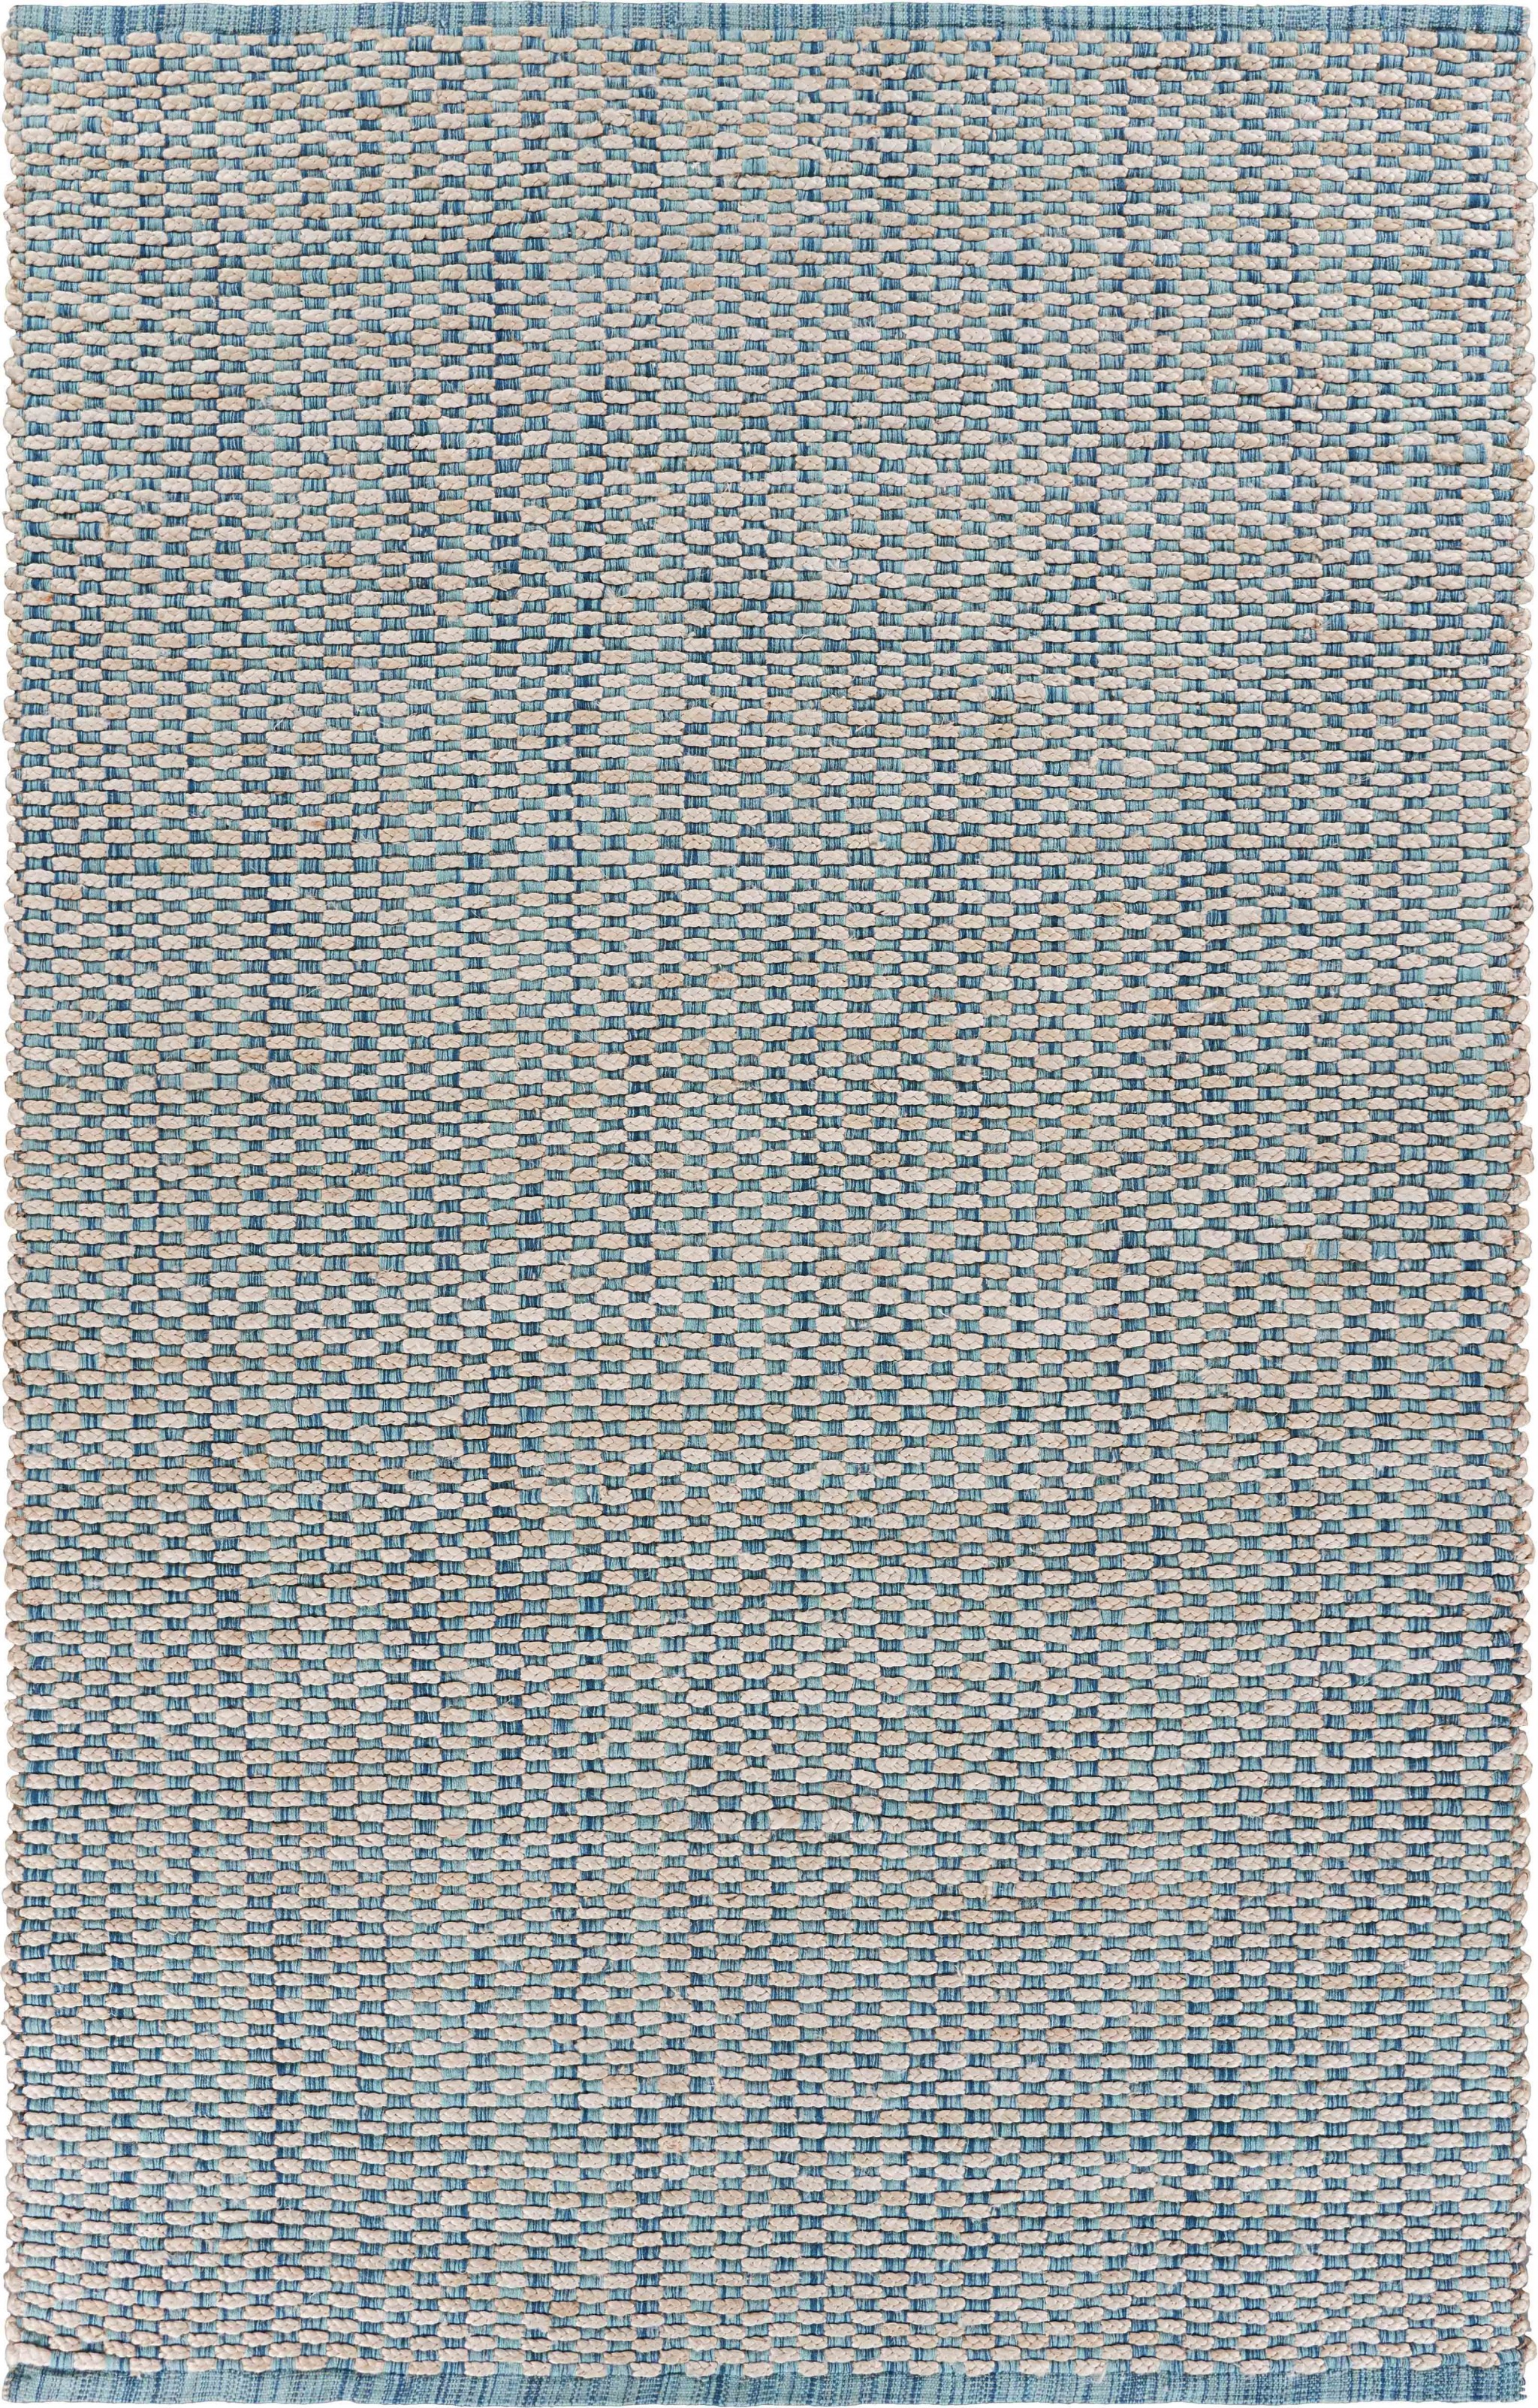 9’ x 12’ Blue and Beige Toned Area Rug-395502-1